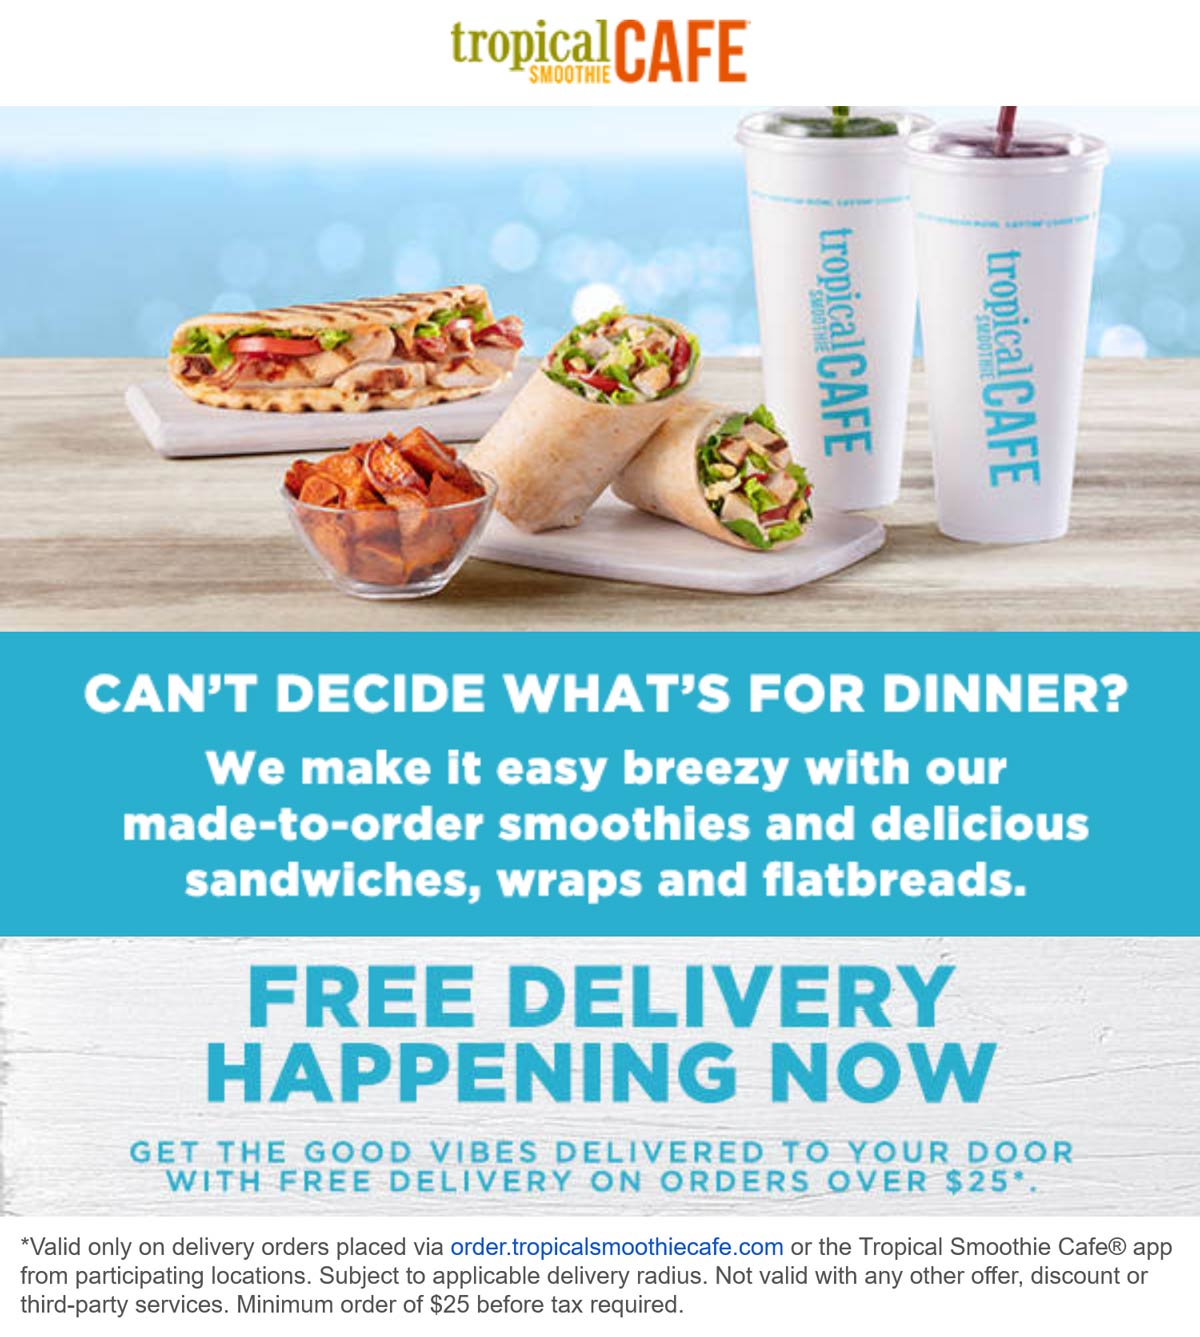 Tropical Smoothie Cafe restaurants Coupon  Free delivery on $25 at Tropical Smoothie Cafe #tropicalsmoothiecafe 